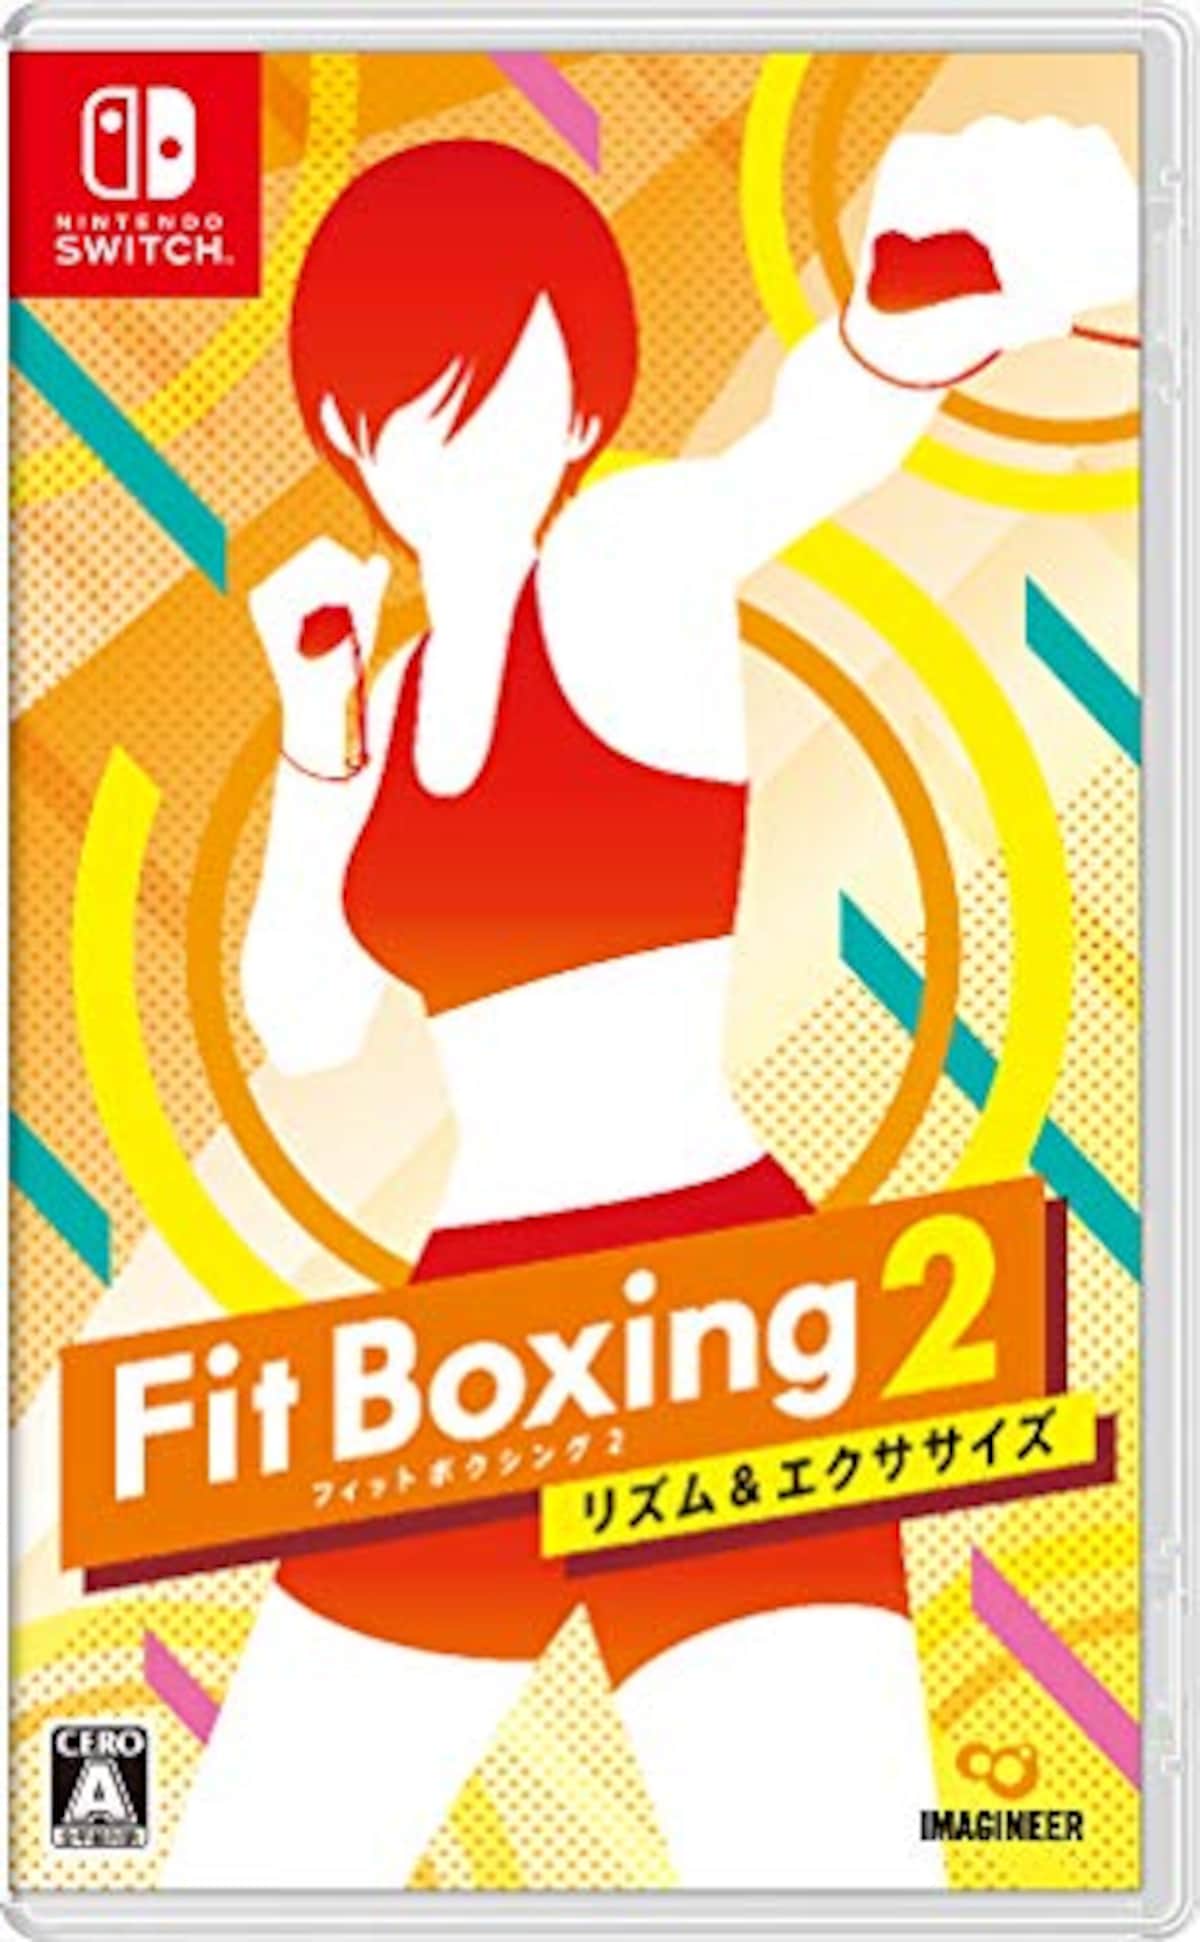 Fit Boxing 2 -リズム＆エクササイズ-